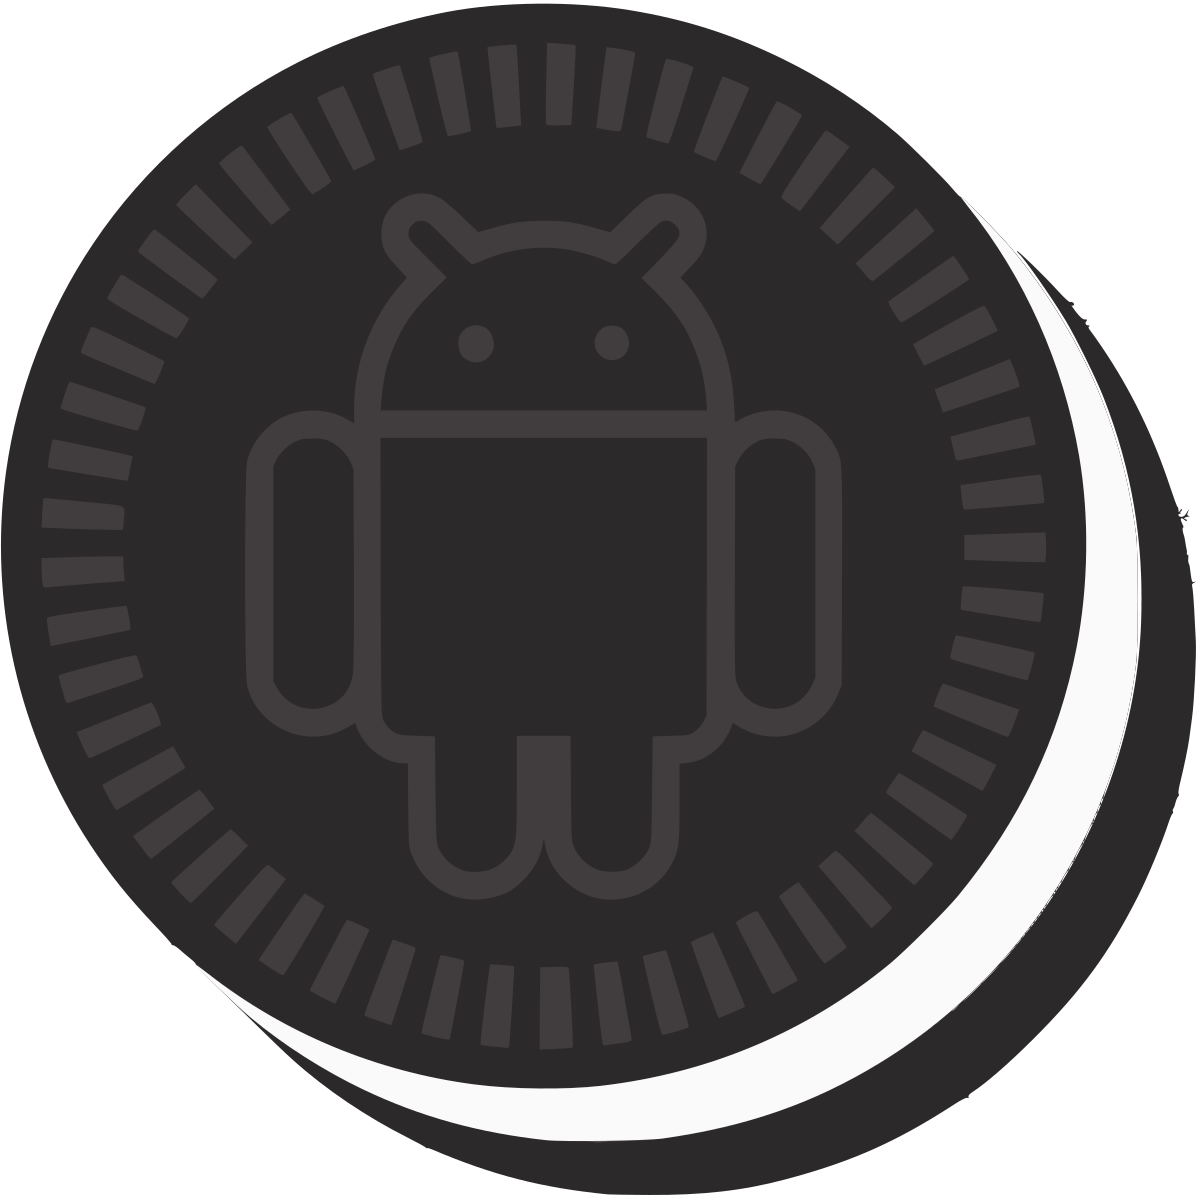 android gingerbread logo png